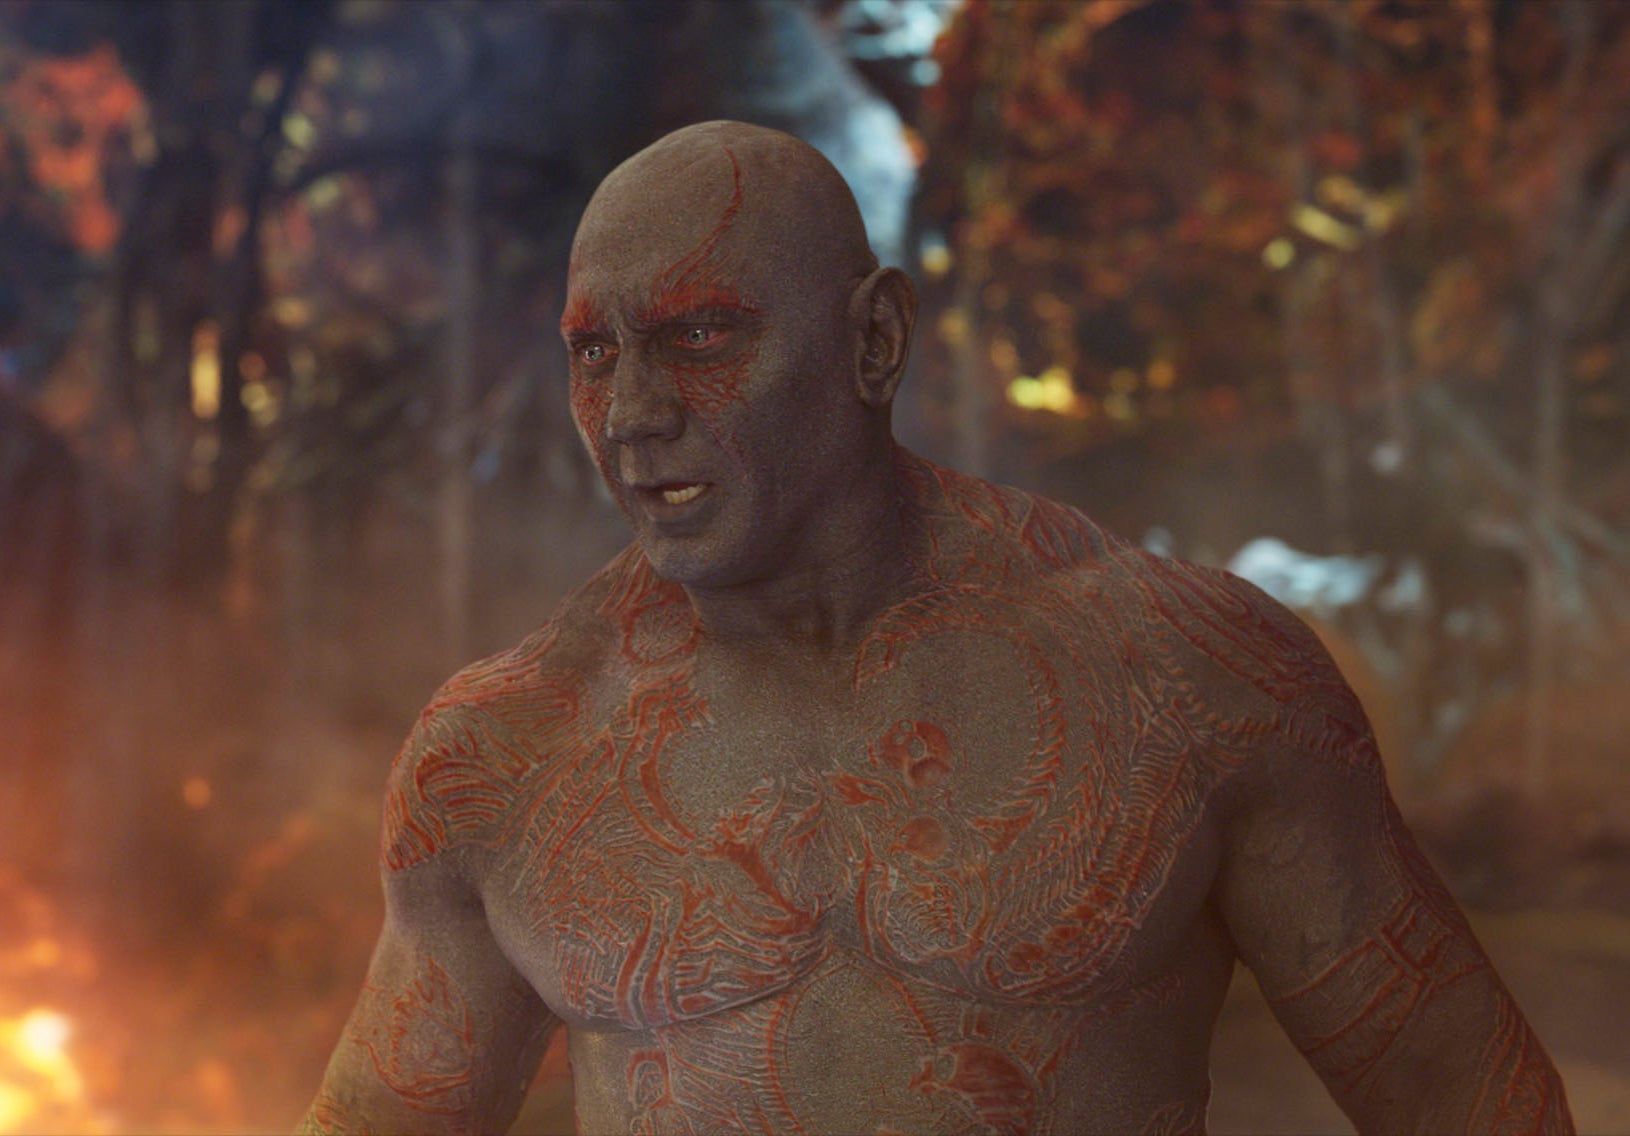 Drax stands in front of a fiery scene